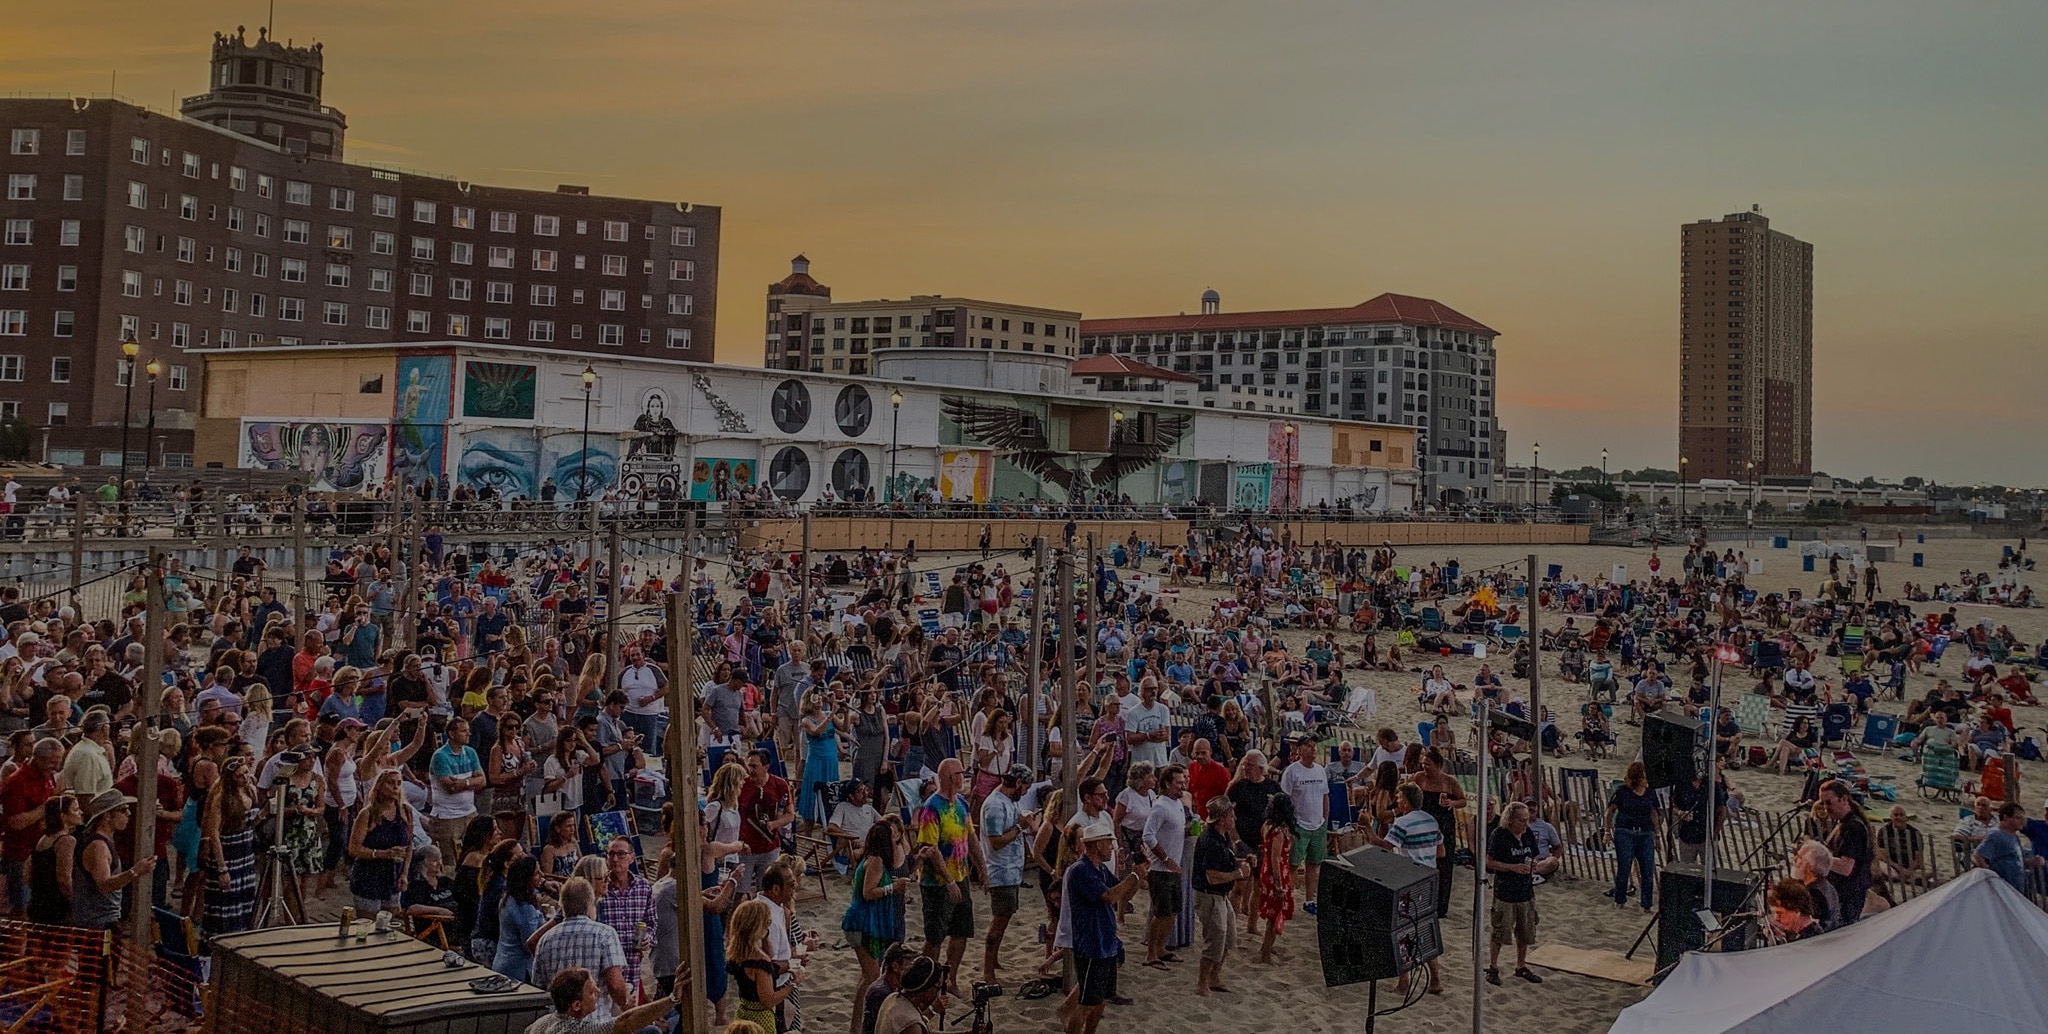 Things to Do at the Asbury Park Boardwalk